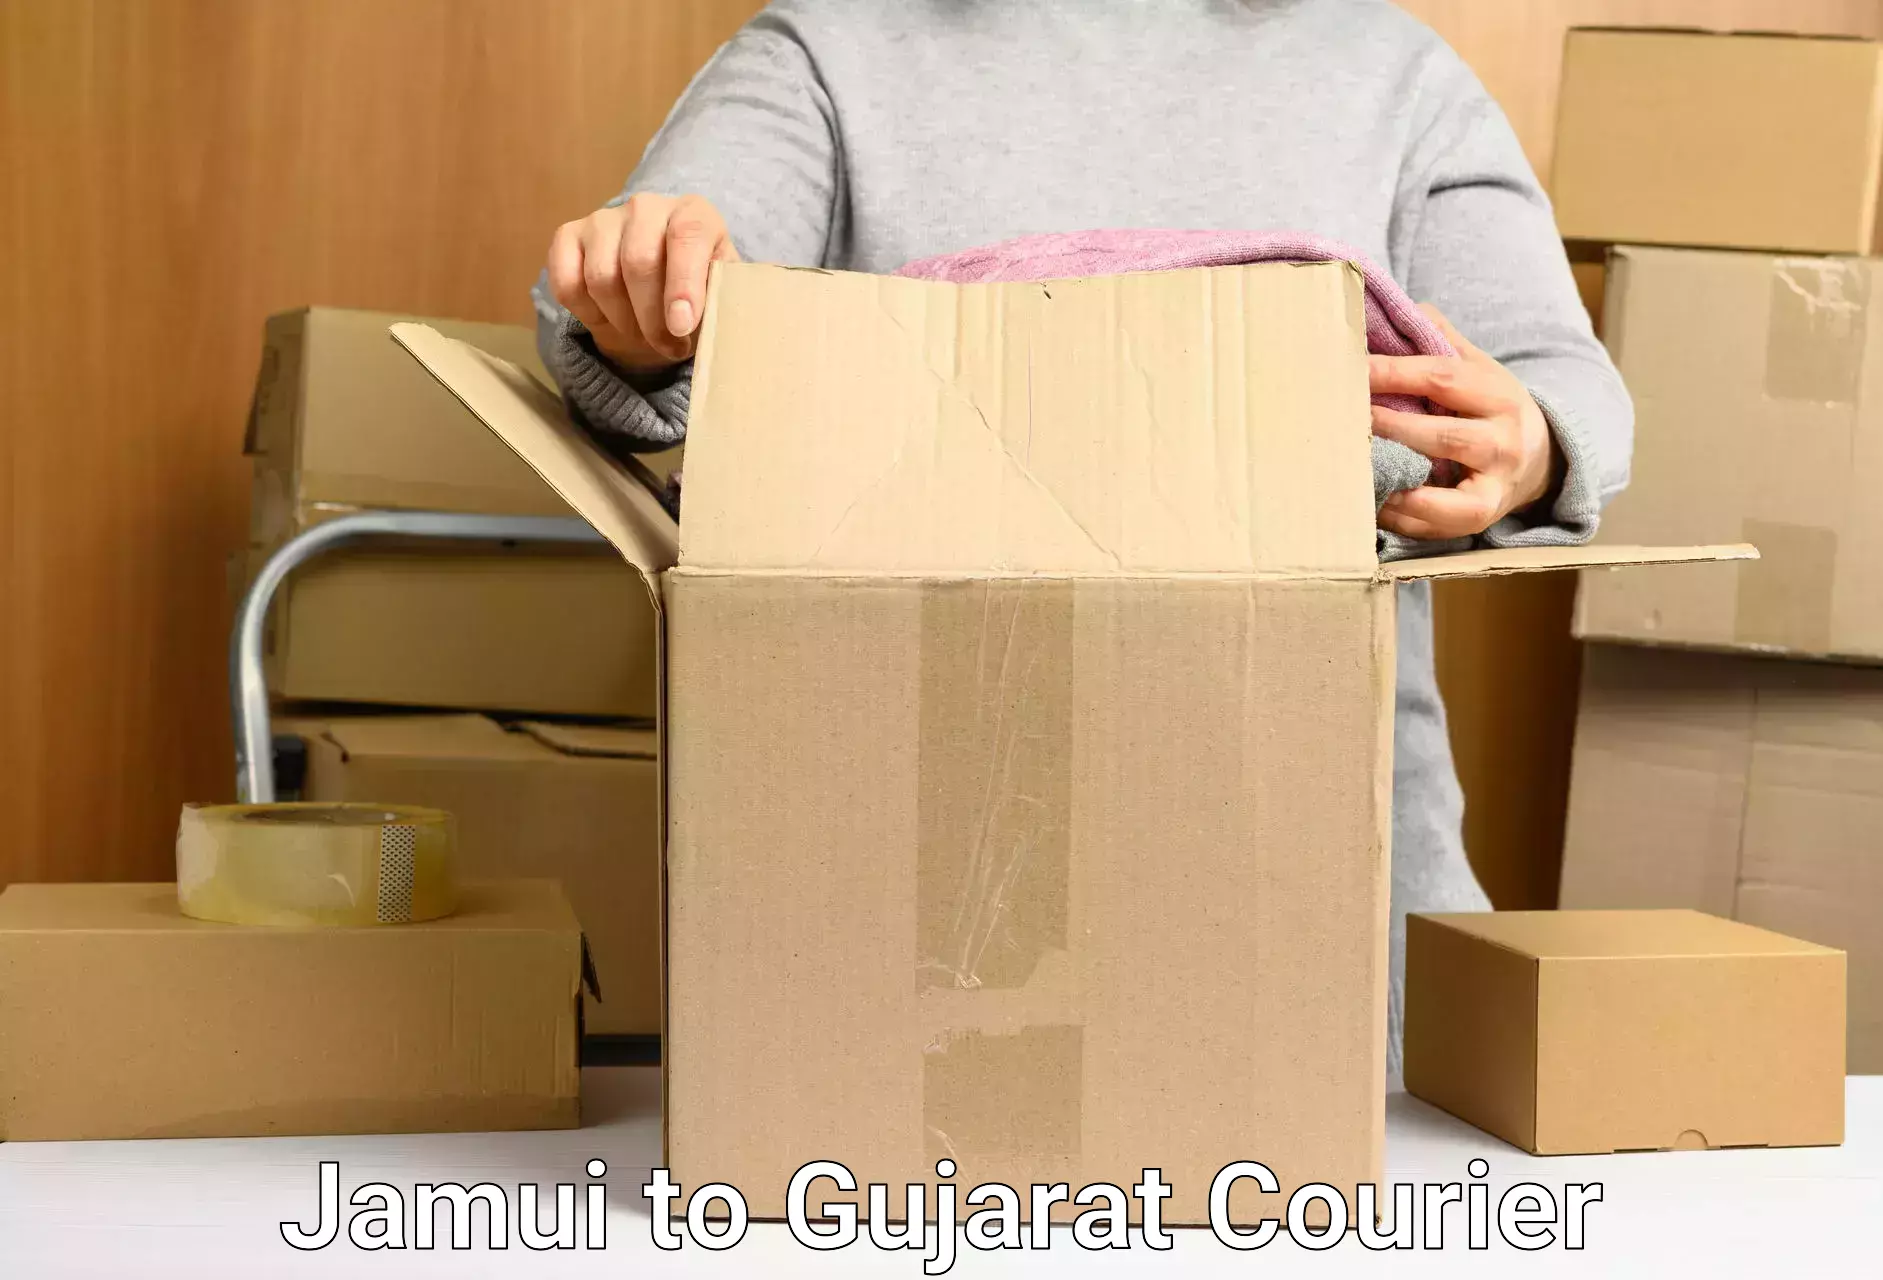 Fast shipping solutions Jamui to Dabhoi